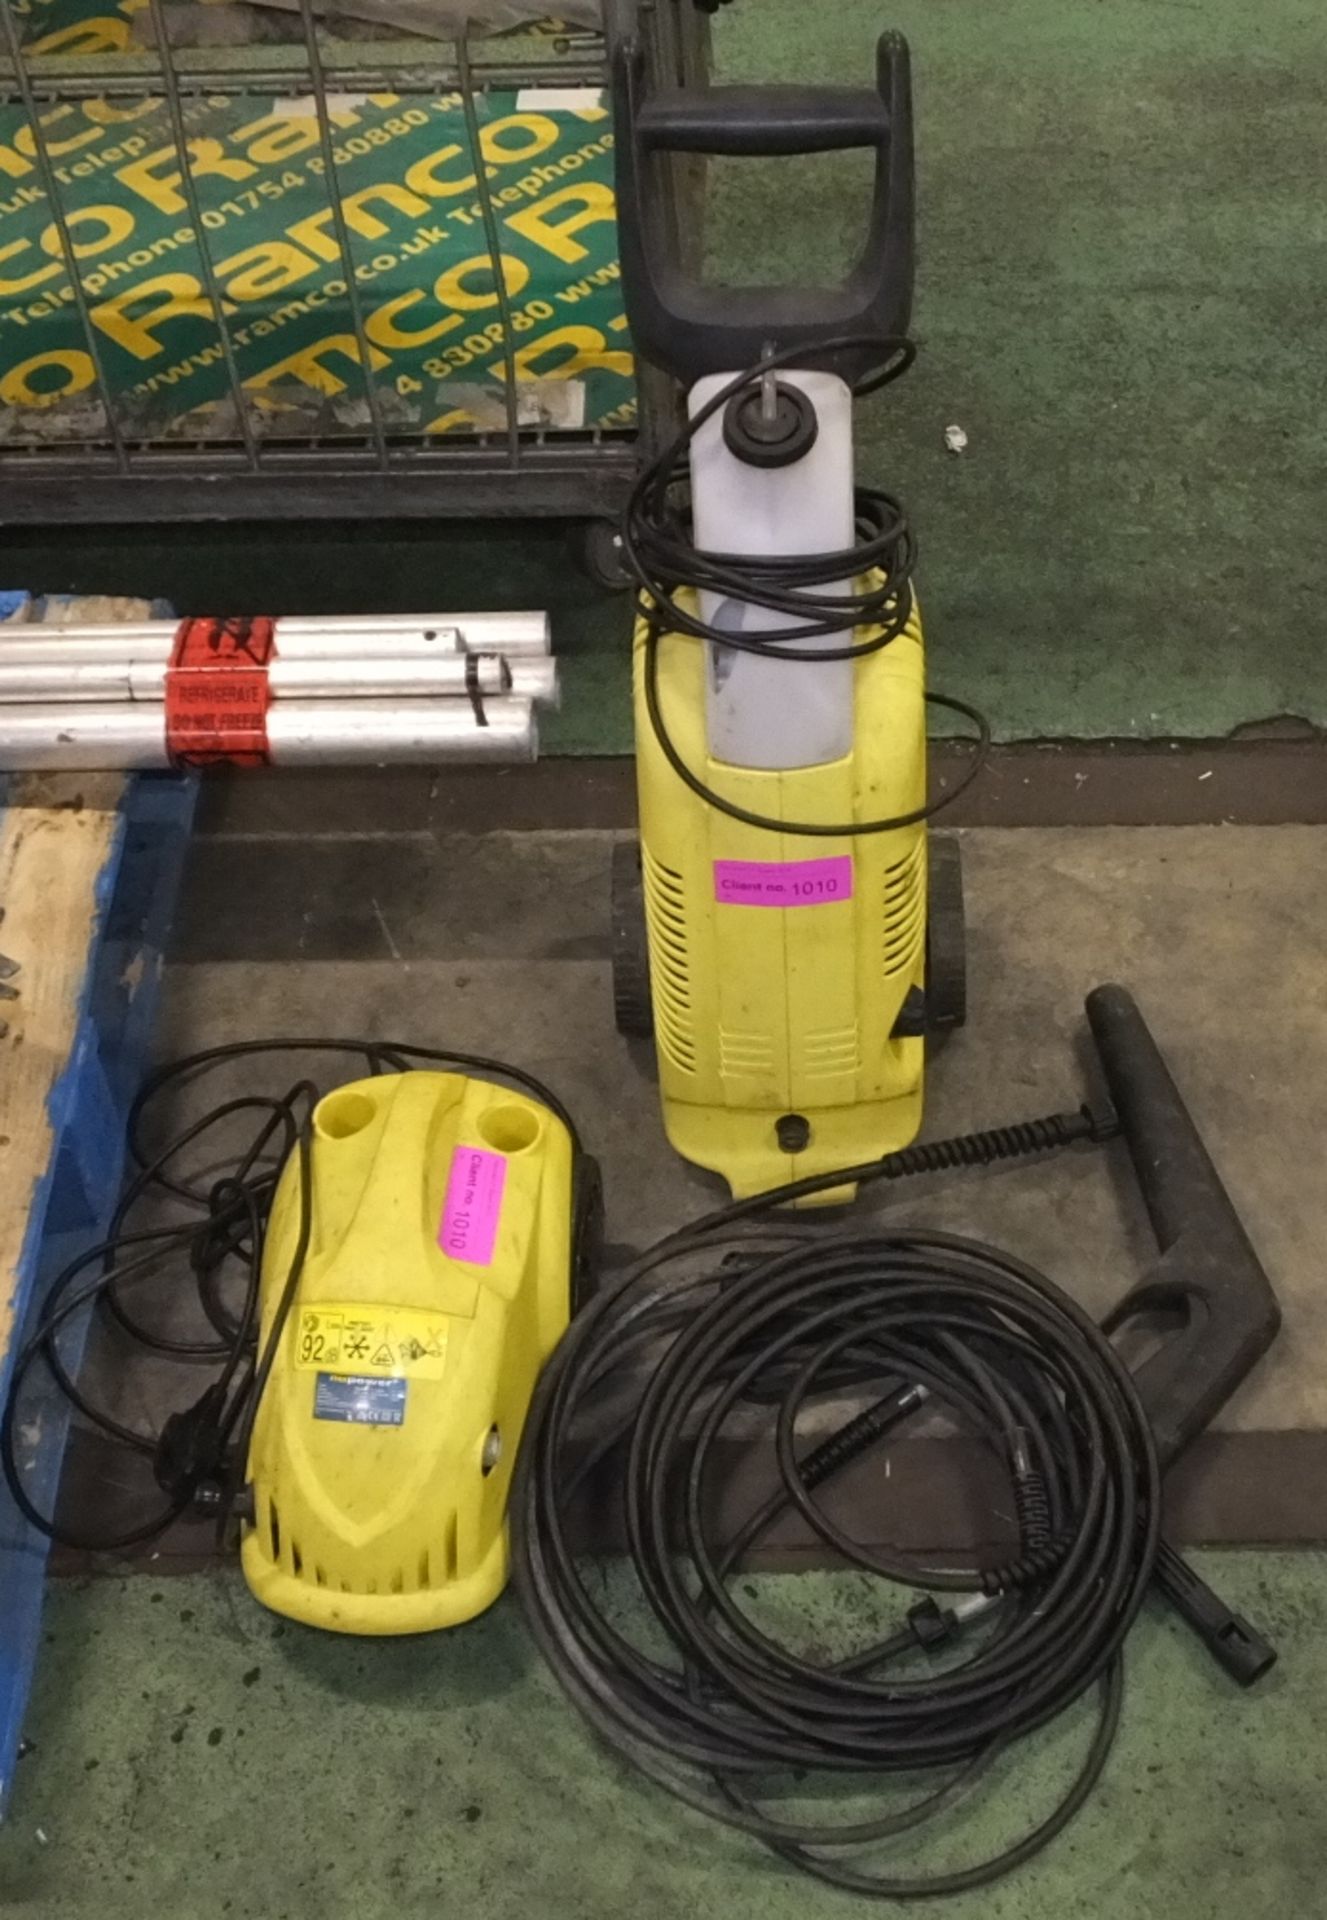 Nu Power Pressure Cleaner, Power Craft Pressure Cleaner with hoses - As Spares